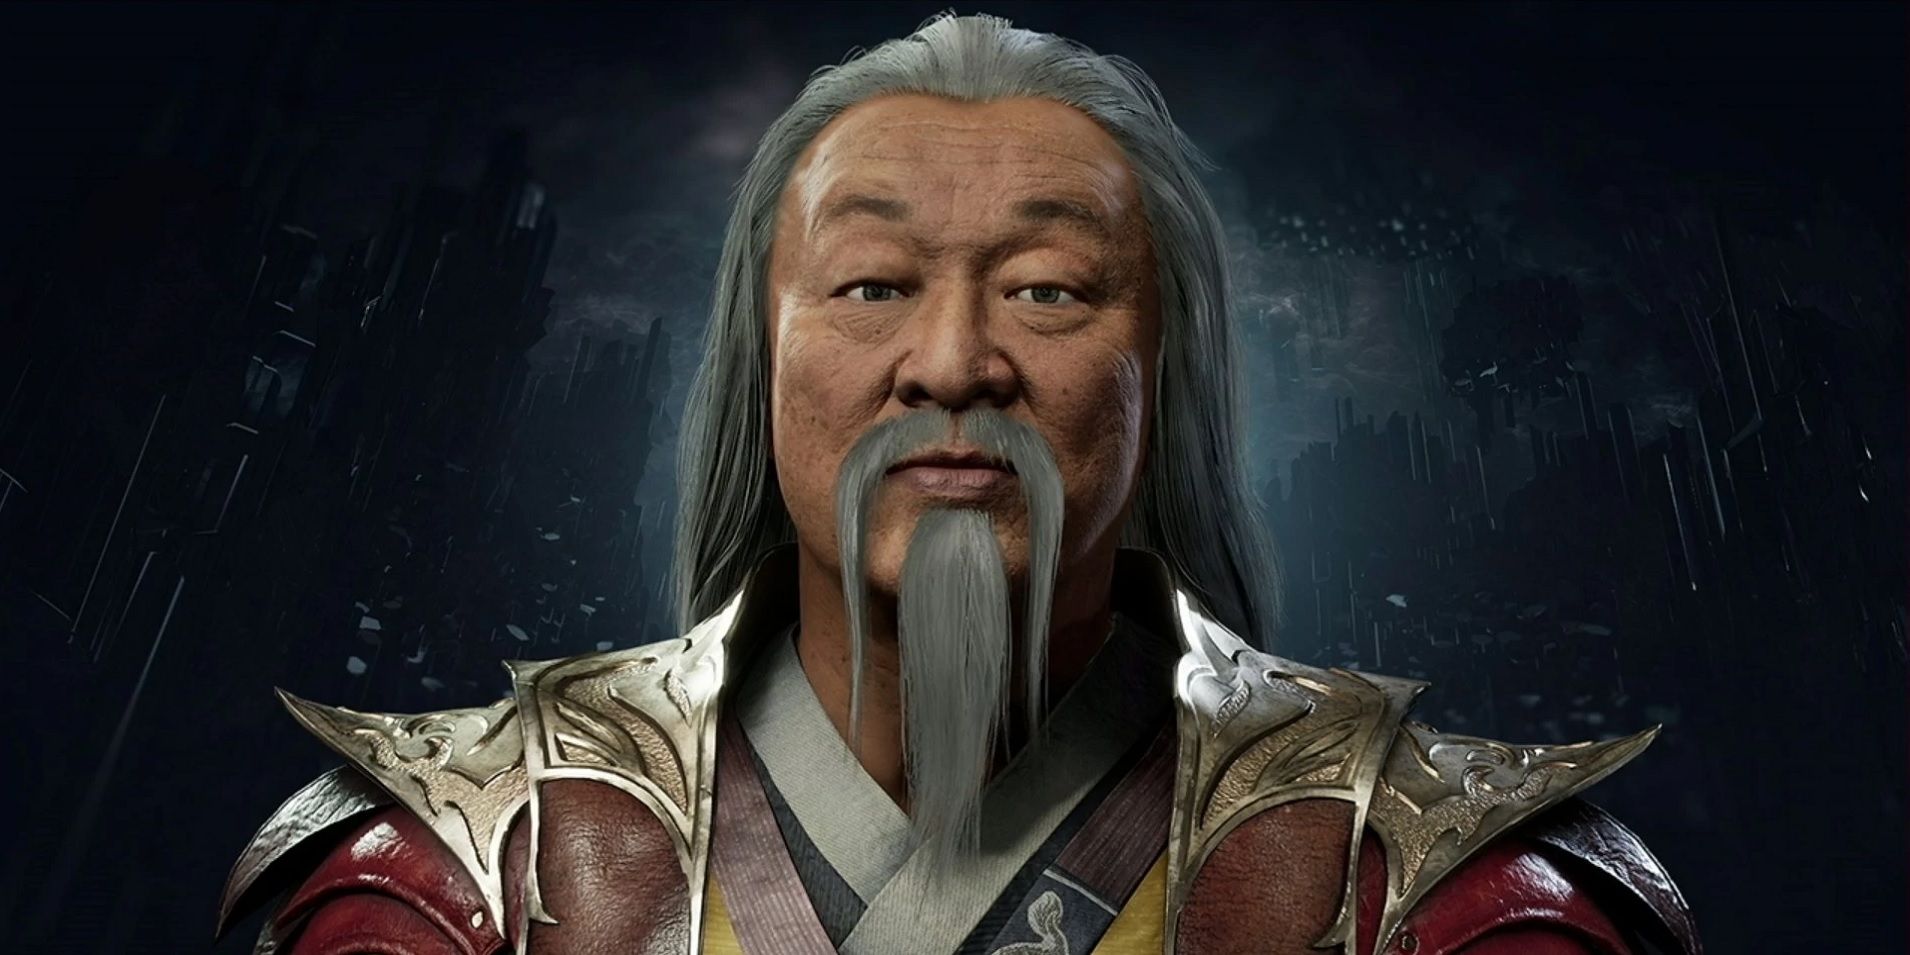 The Realm Kast: Mortal Kombat Online on X: Shang Tsung - Scheming Sorcerer  Opportunity in his future. Khaos in his wake. Shang Tsung grew up in  Outworld's backwaters. Too lazy for hard